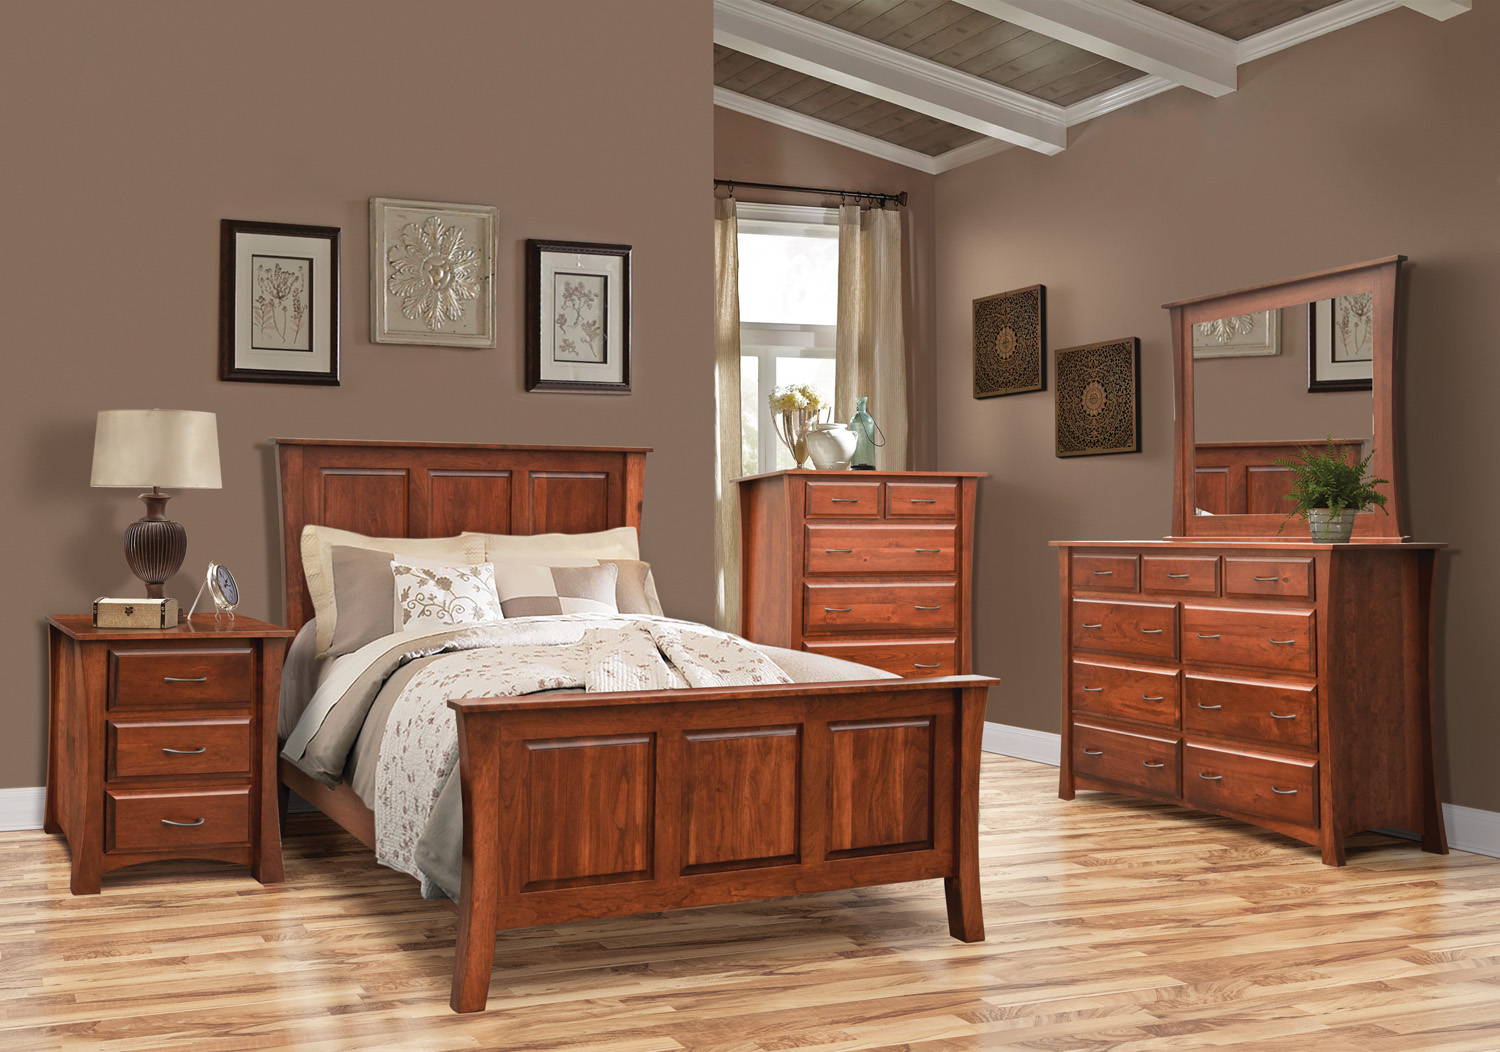 Image of fully customizable Cove Bedroom Set through Harvest Home Interiors Amish Solid Wood Furniture